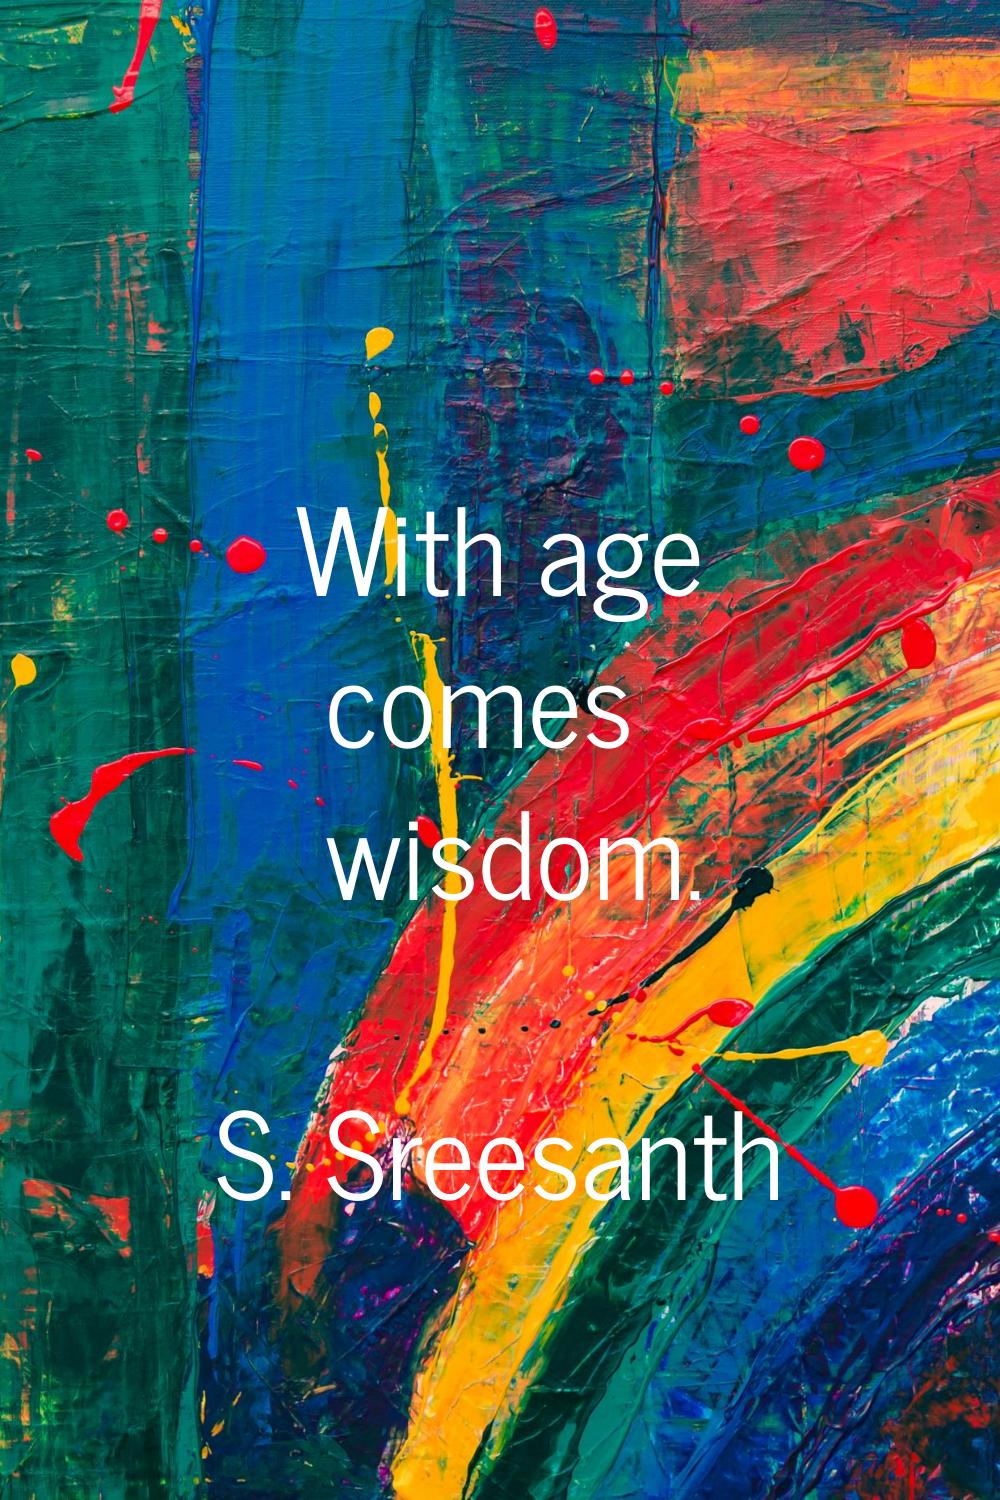 With age comes wisdom.